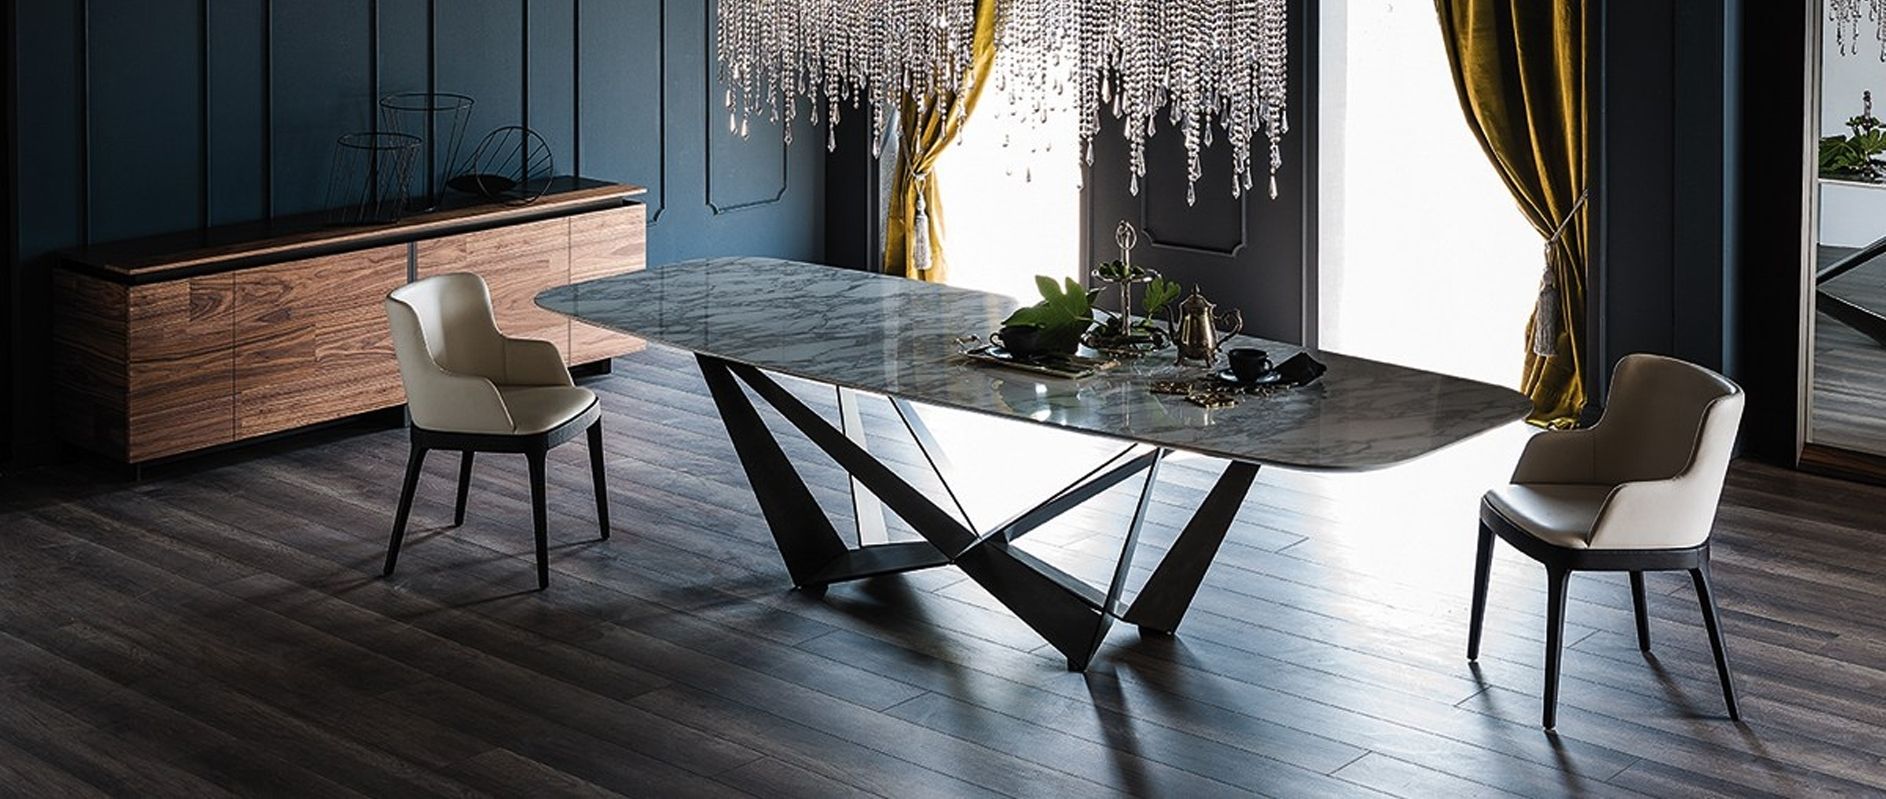 Cheap Contemporary Dining Tables For Current Dining Room Contemporary Glass Dining Table Set Small Modern Dining (View 6 of 25)